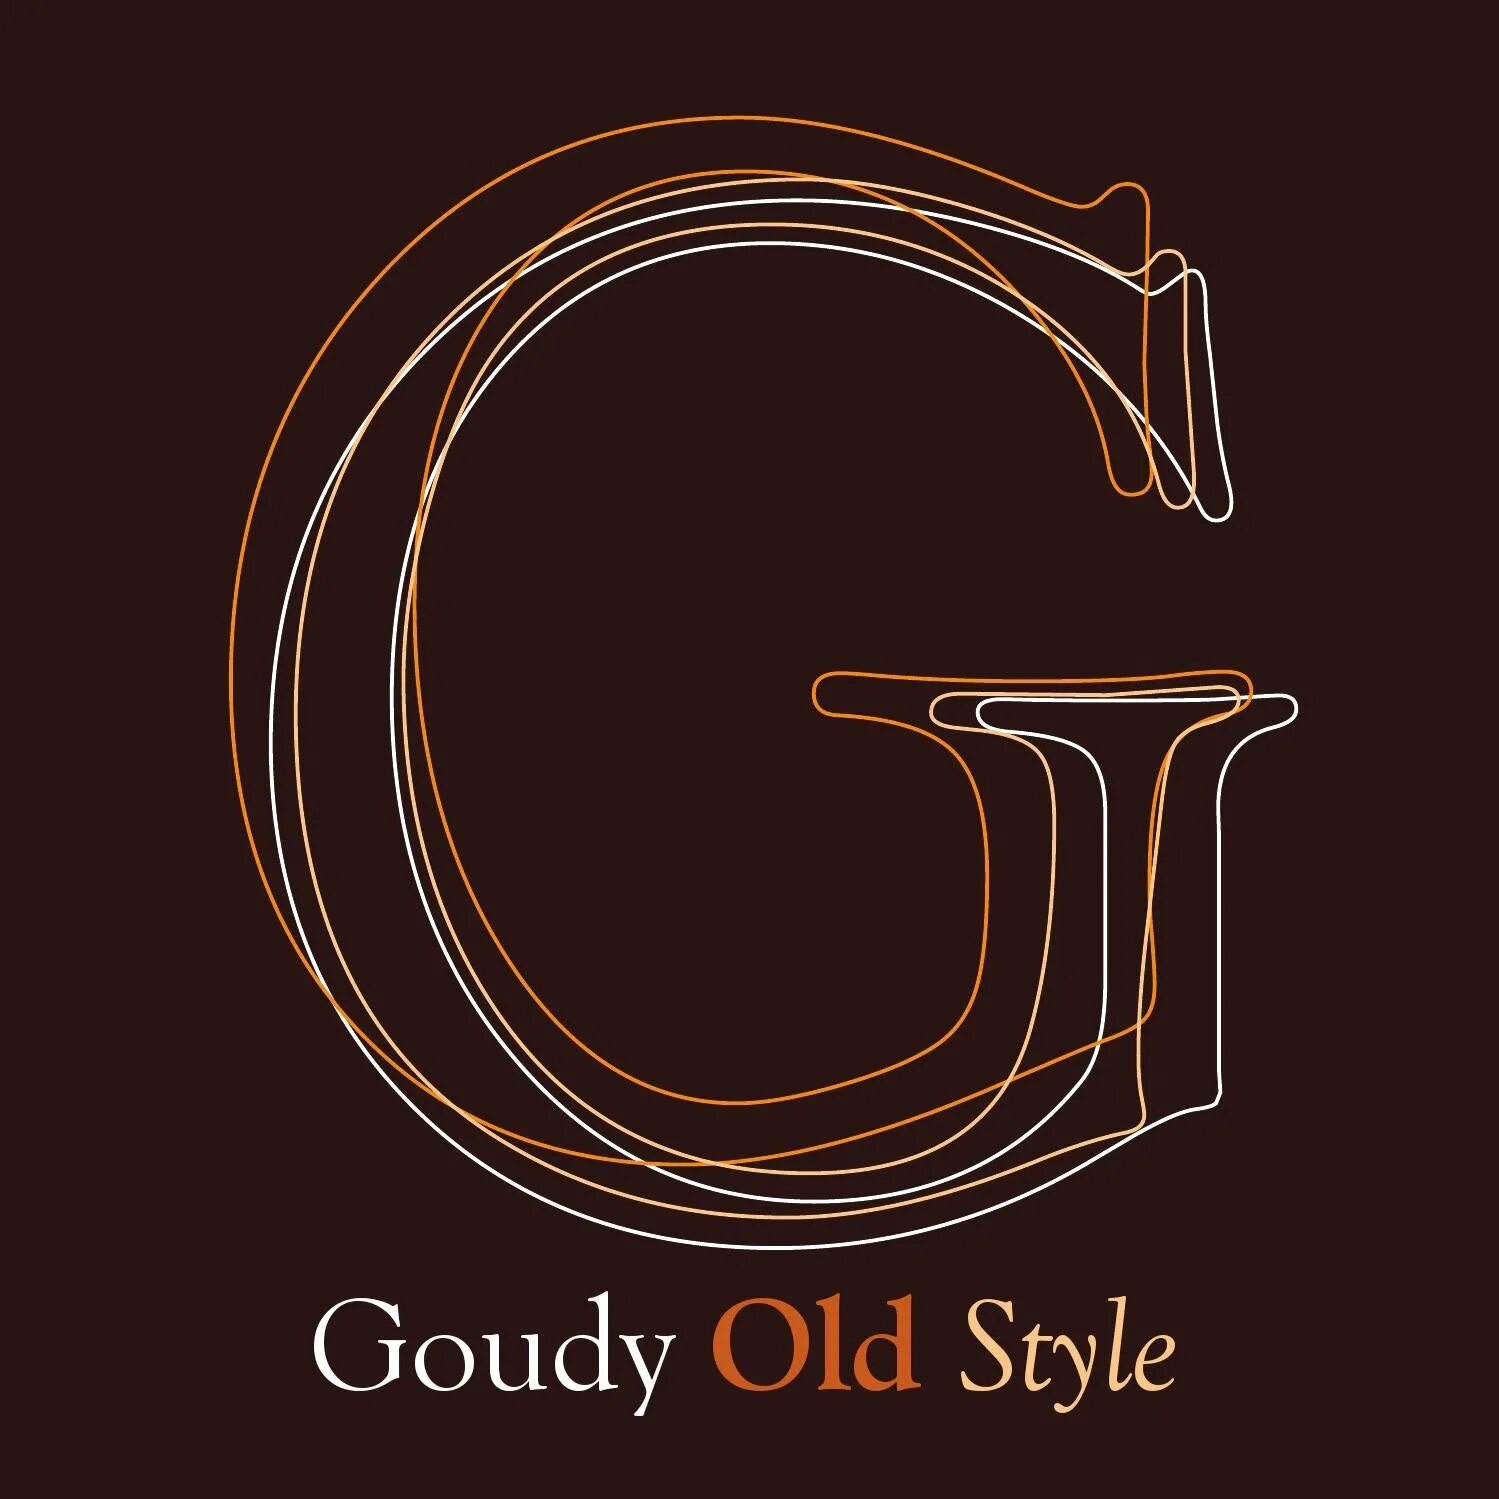 Old Style шрифт. Шрифт Bookman old Style. Шрифт Goudy. Шрифт в стиле Модерн. Шрифт bookman old